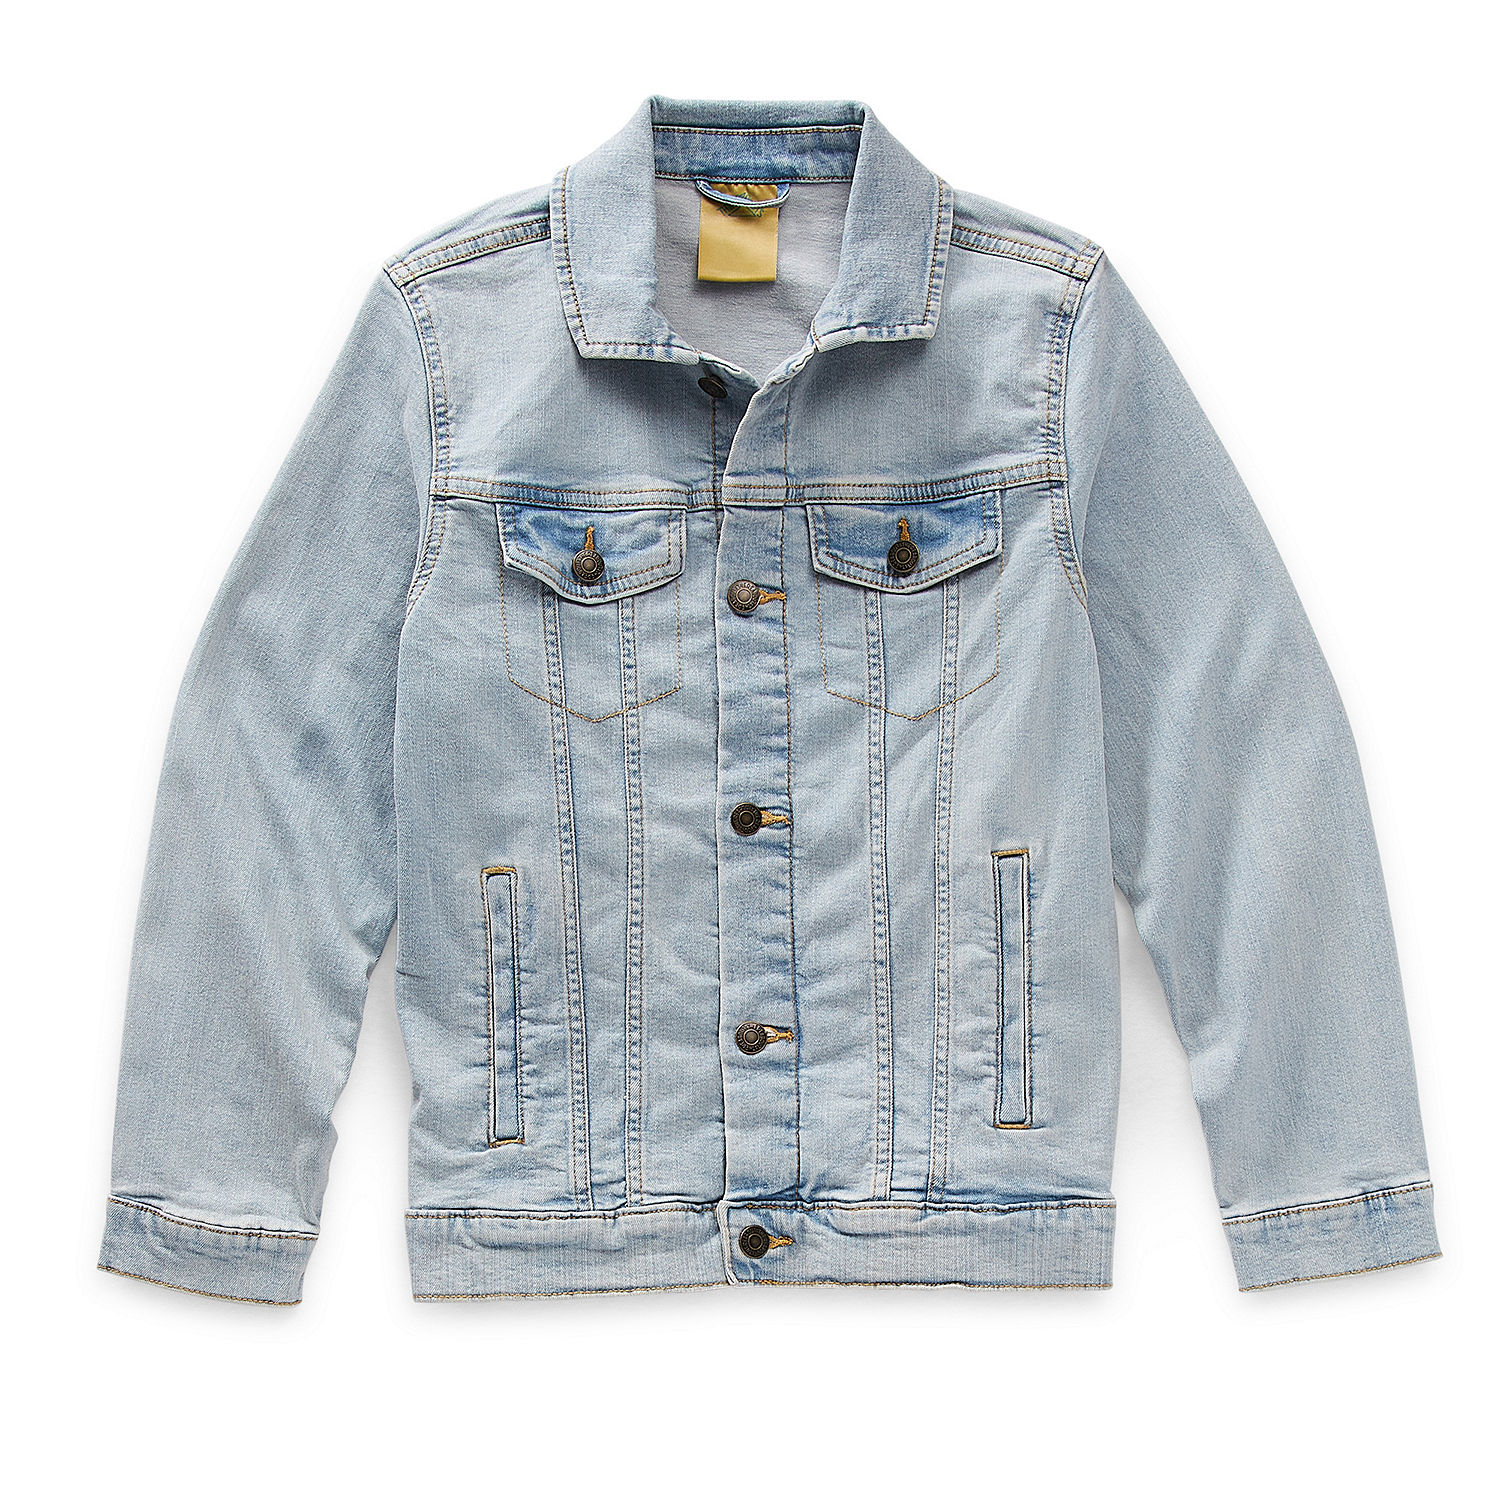 Thereabouts Little & Big Unisex Denim Jacket, Color: Light Wash - JCPenney